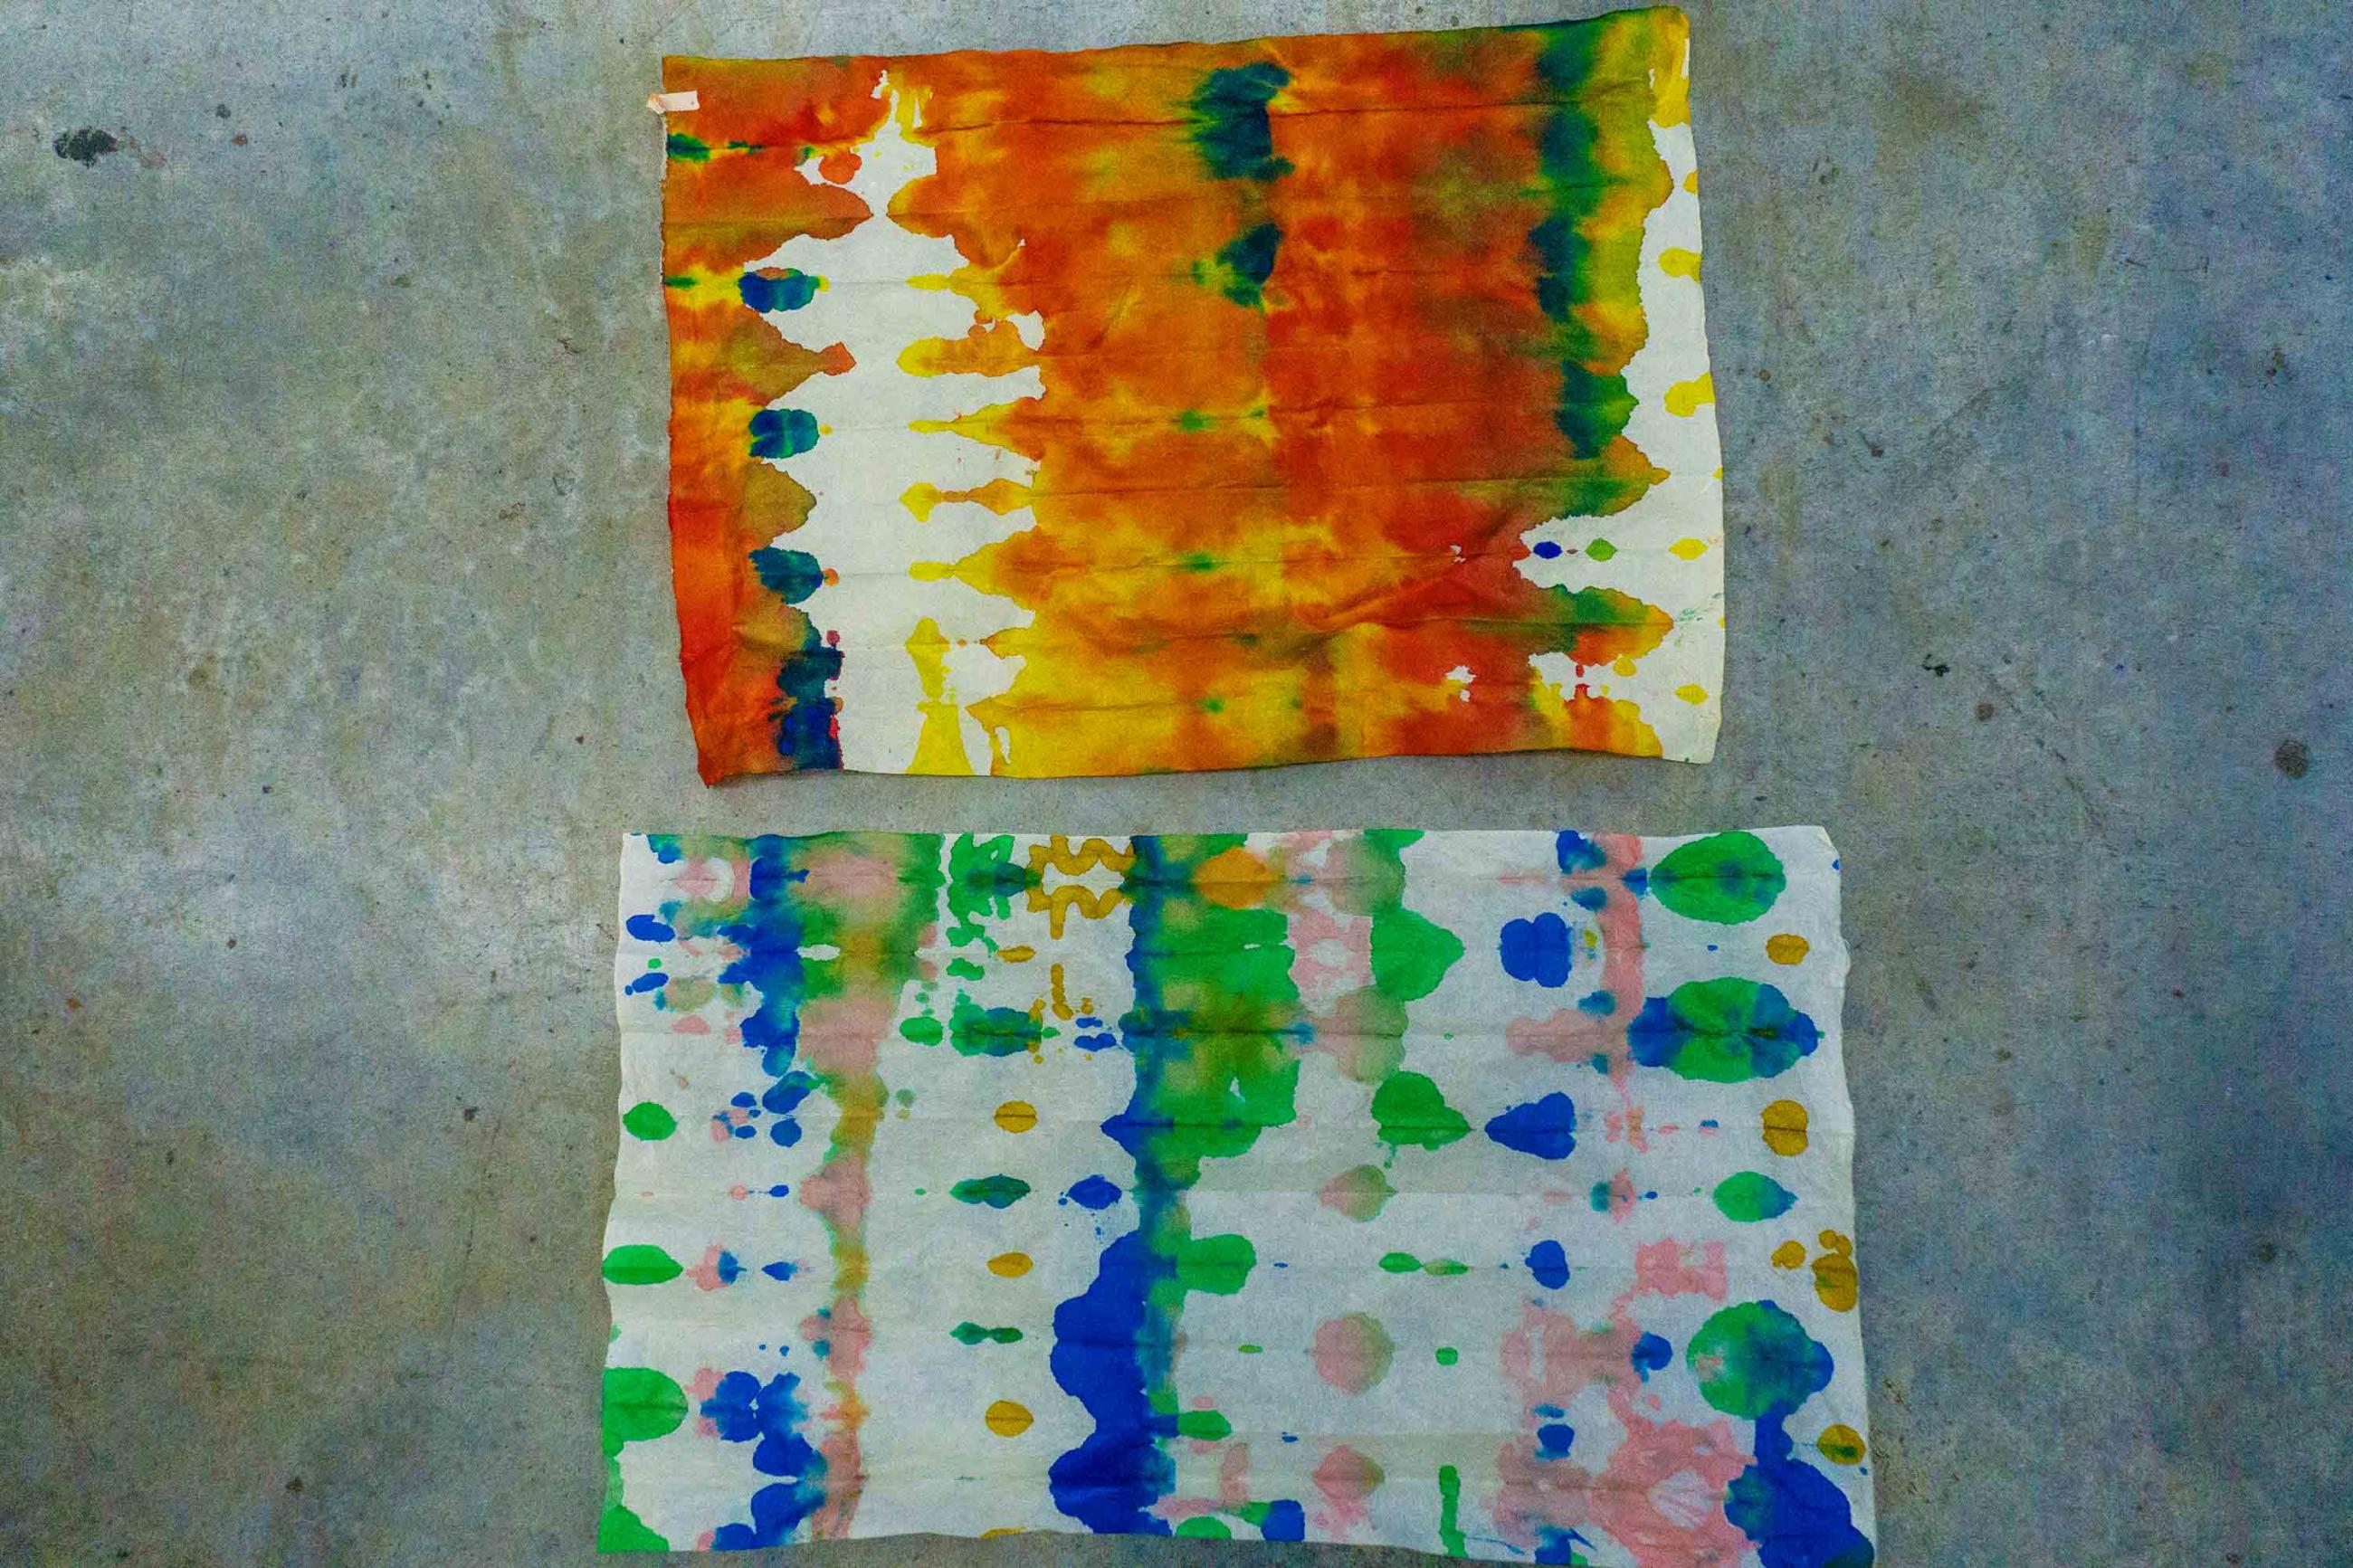 Photo of two artworks: one is primarily orange and yellow; the other green, pink, and blue